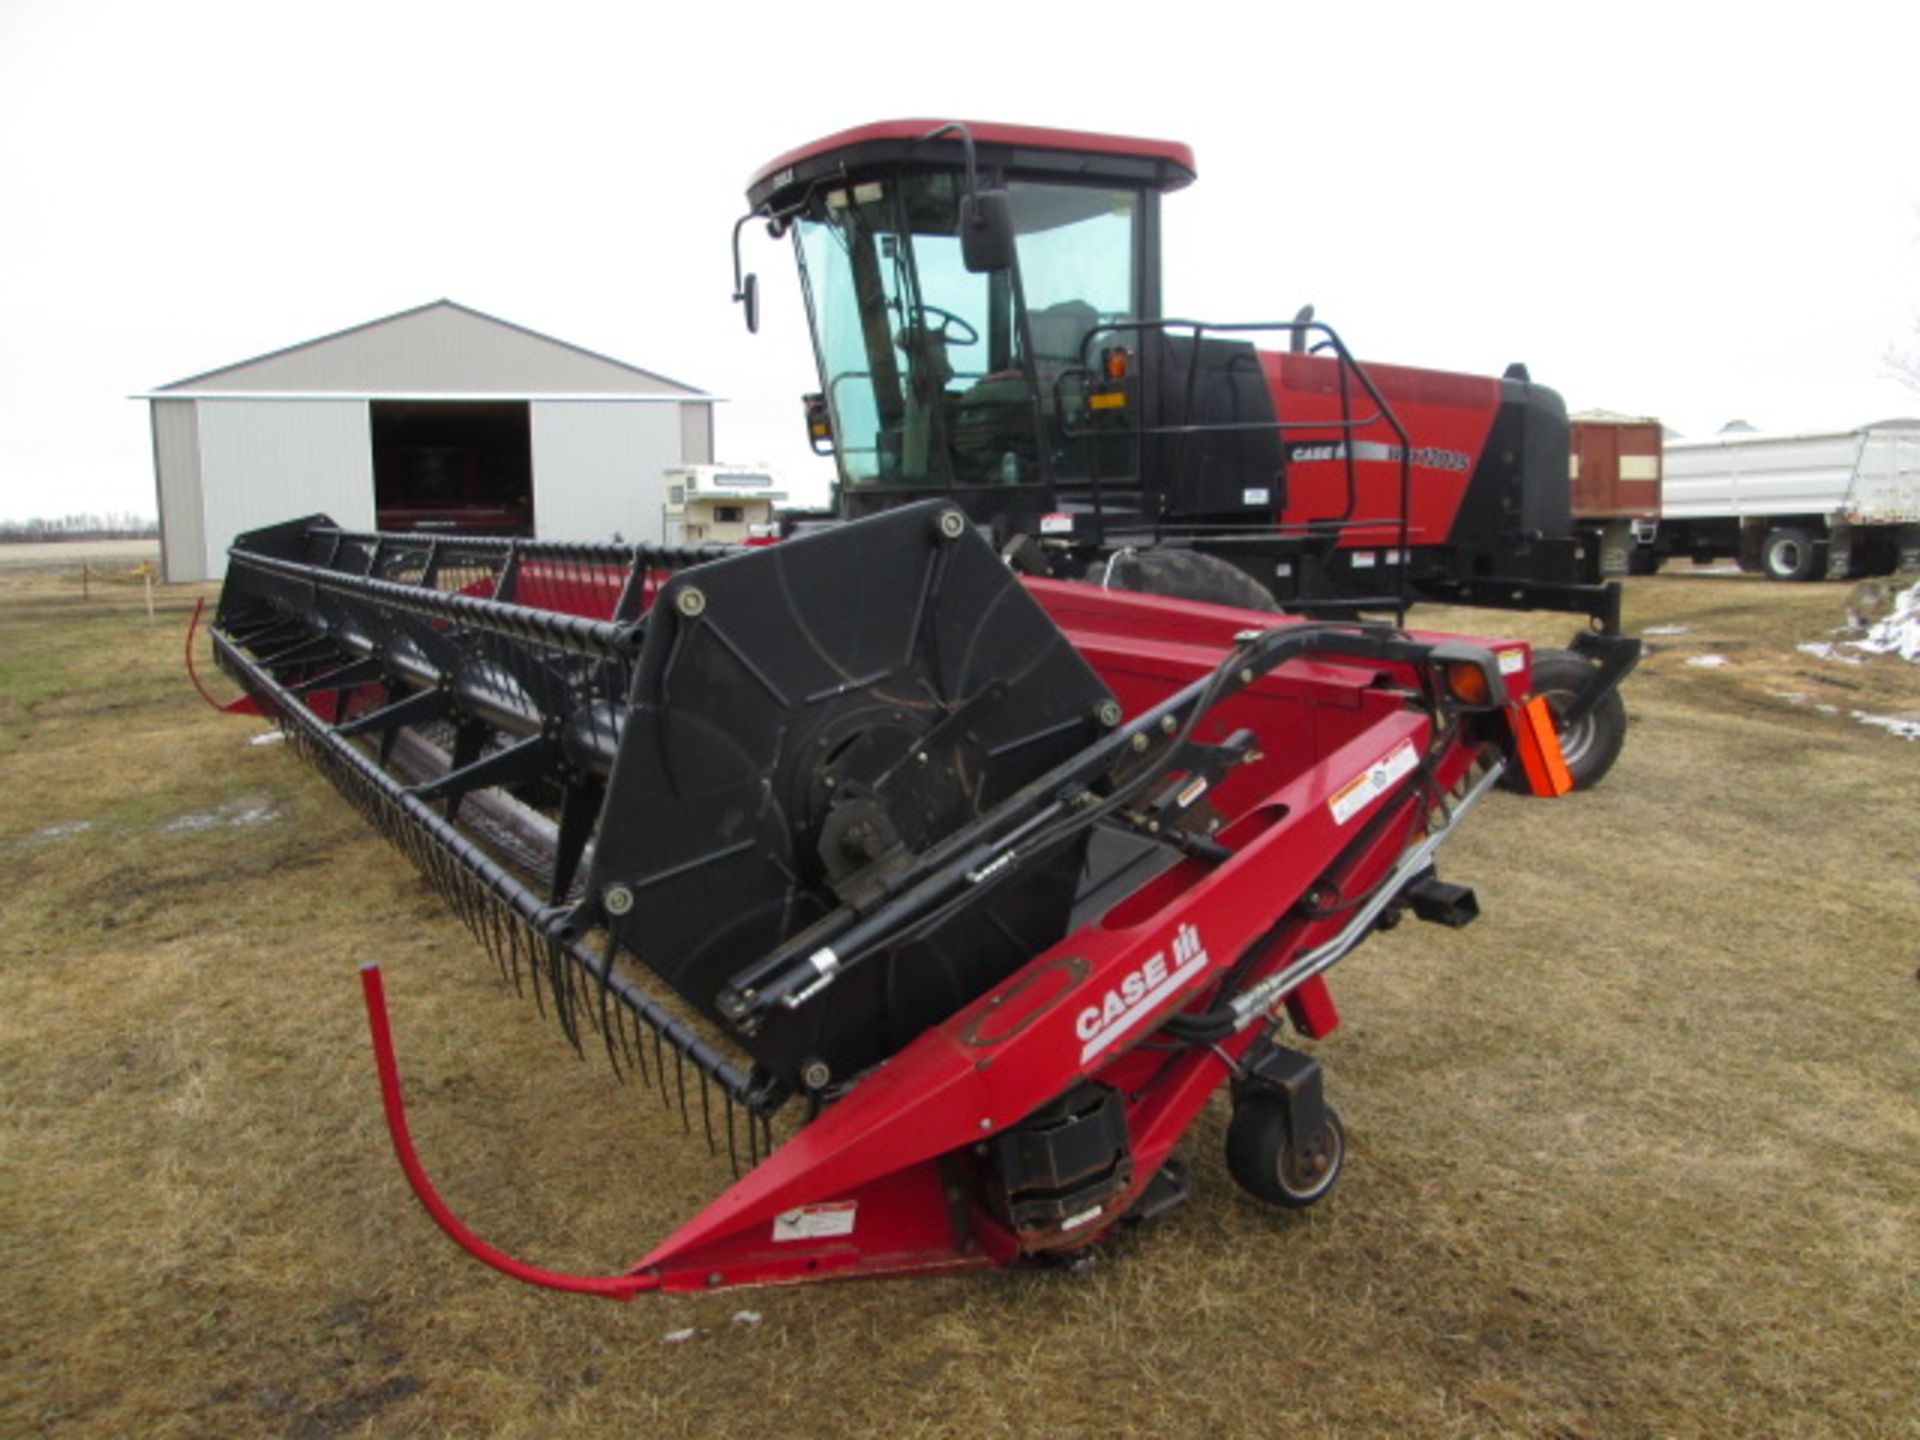 Case WDX 1202 S swather (2005), c/w 30' DHX 302 header (2007), showing 795 eng hr, dbl knife - Image 28 of 32